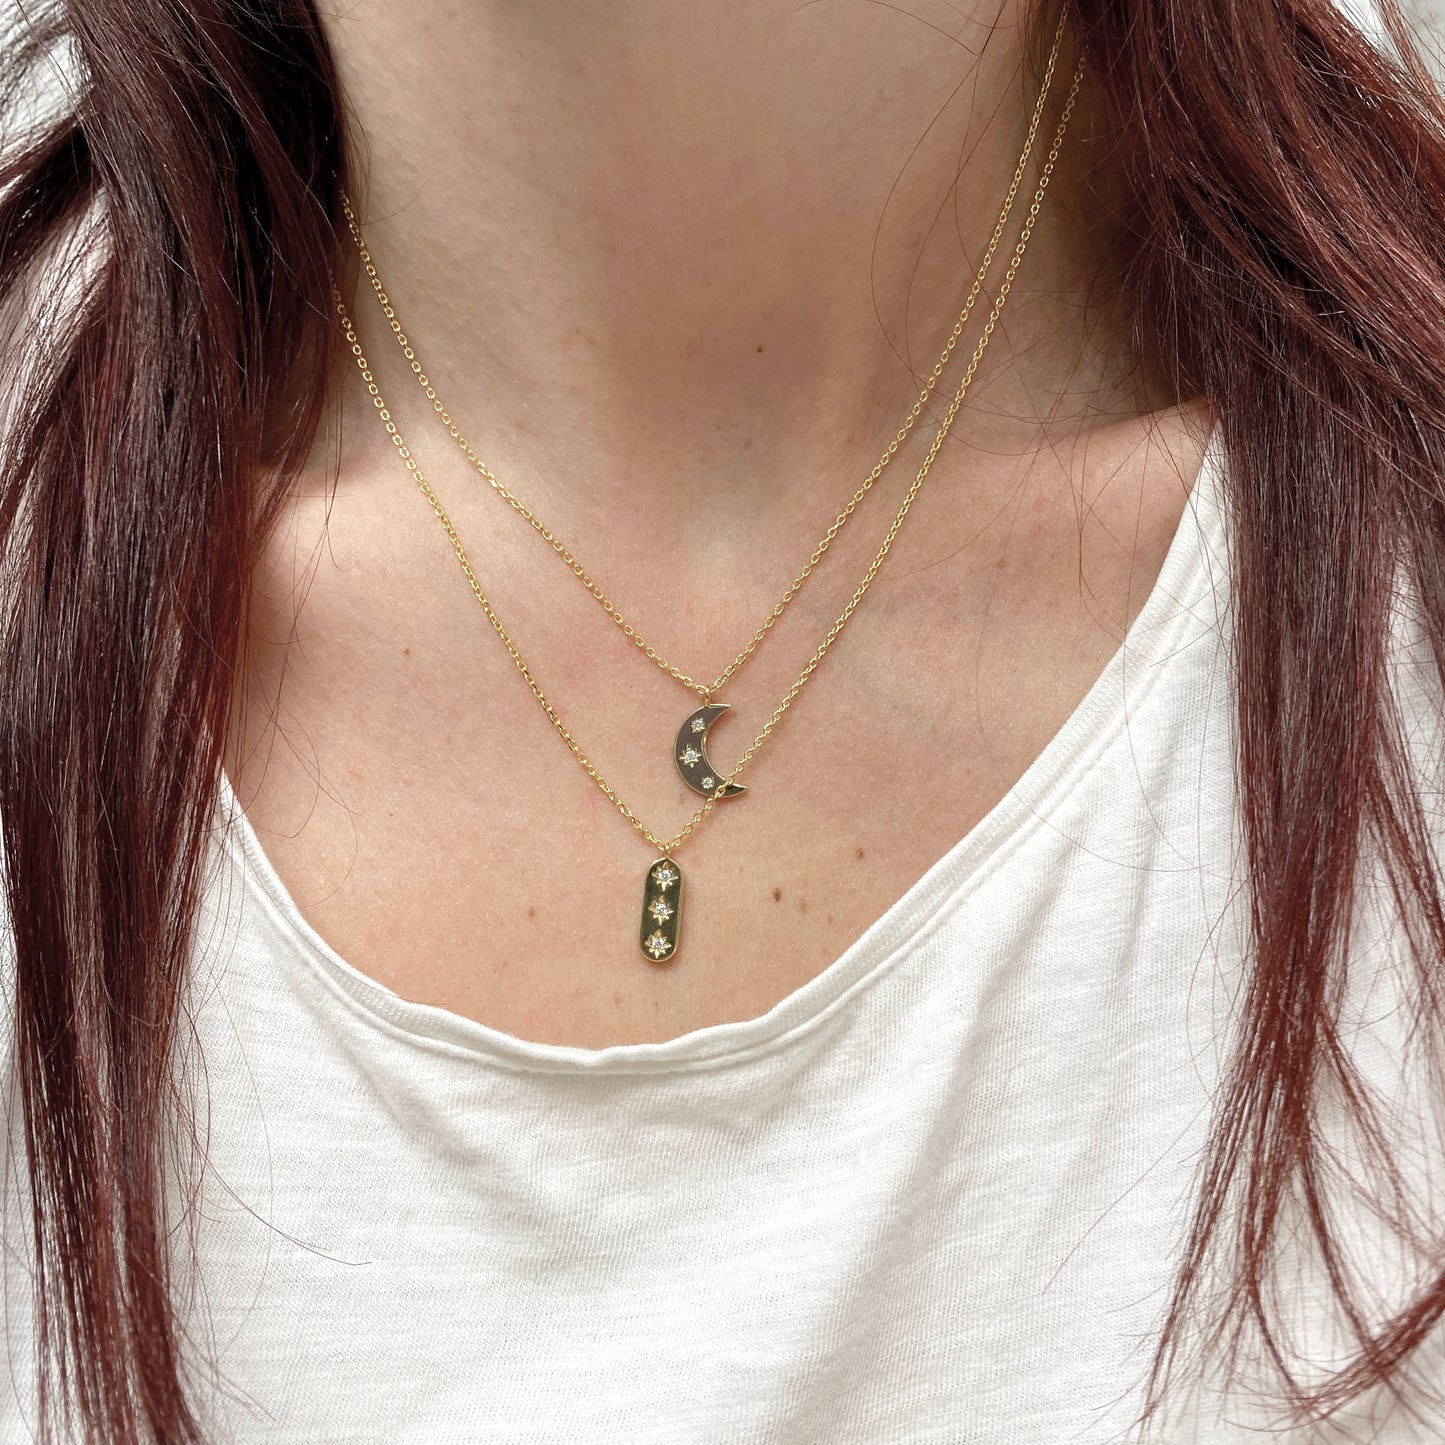 Trifecta Twinkle Necklace • Vertical Bar